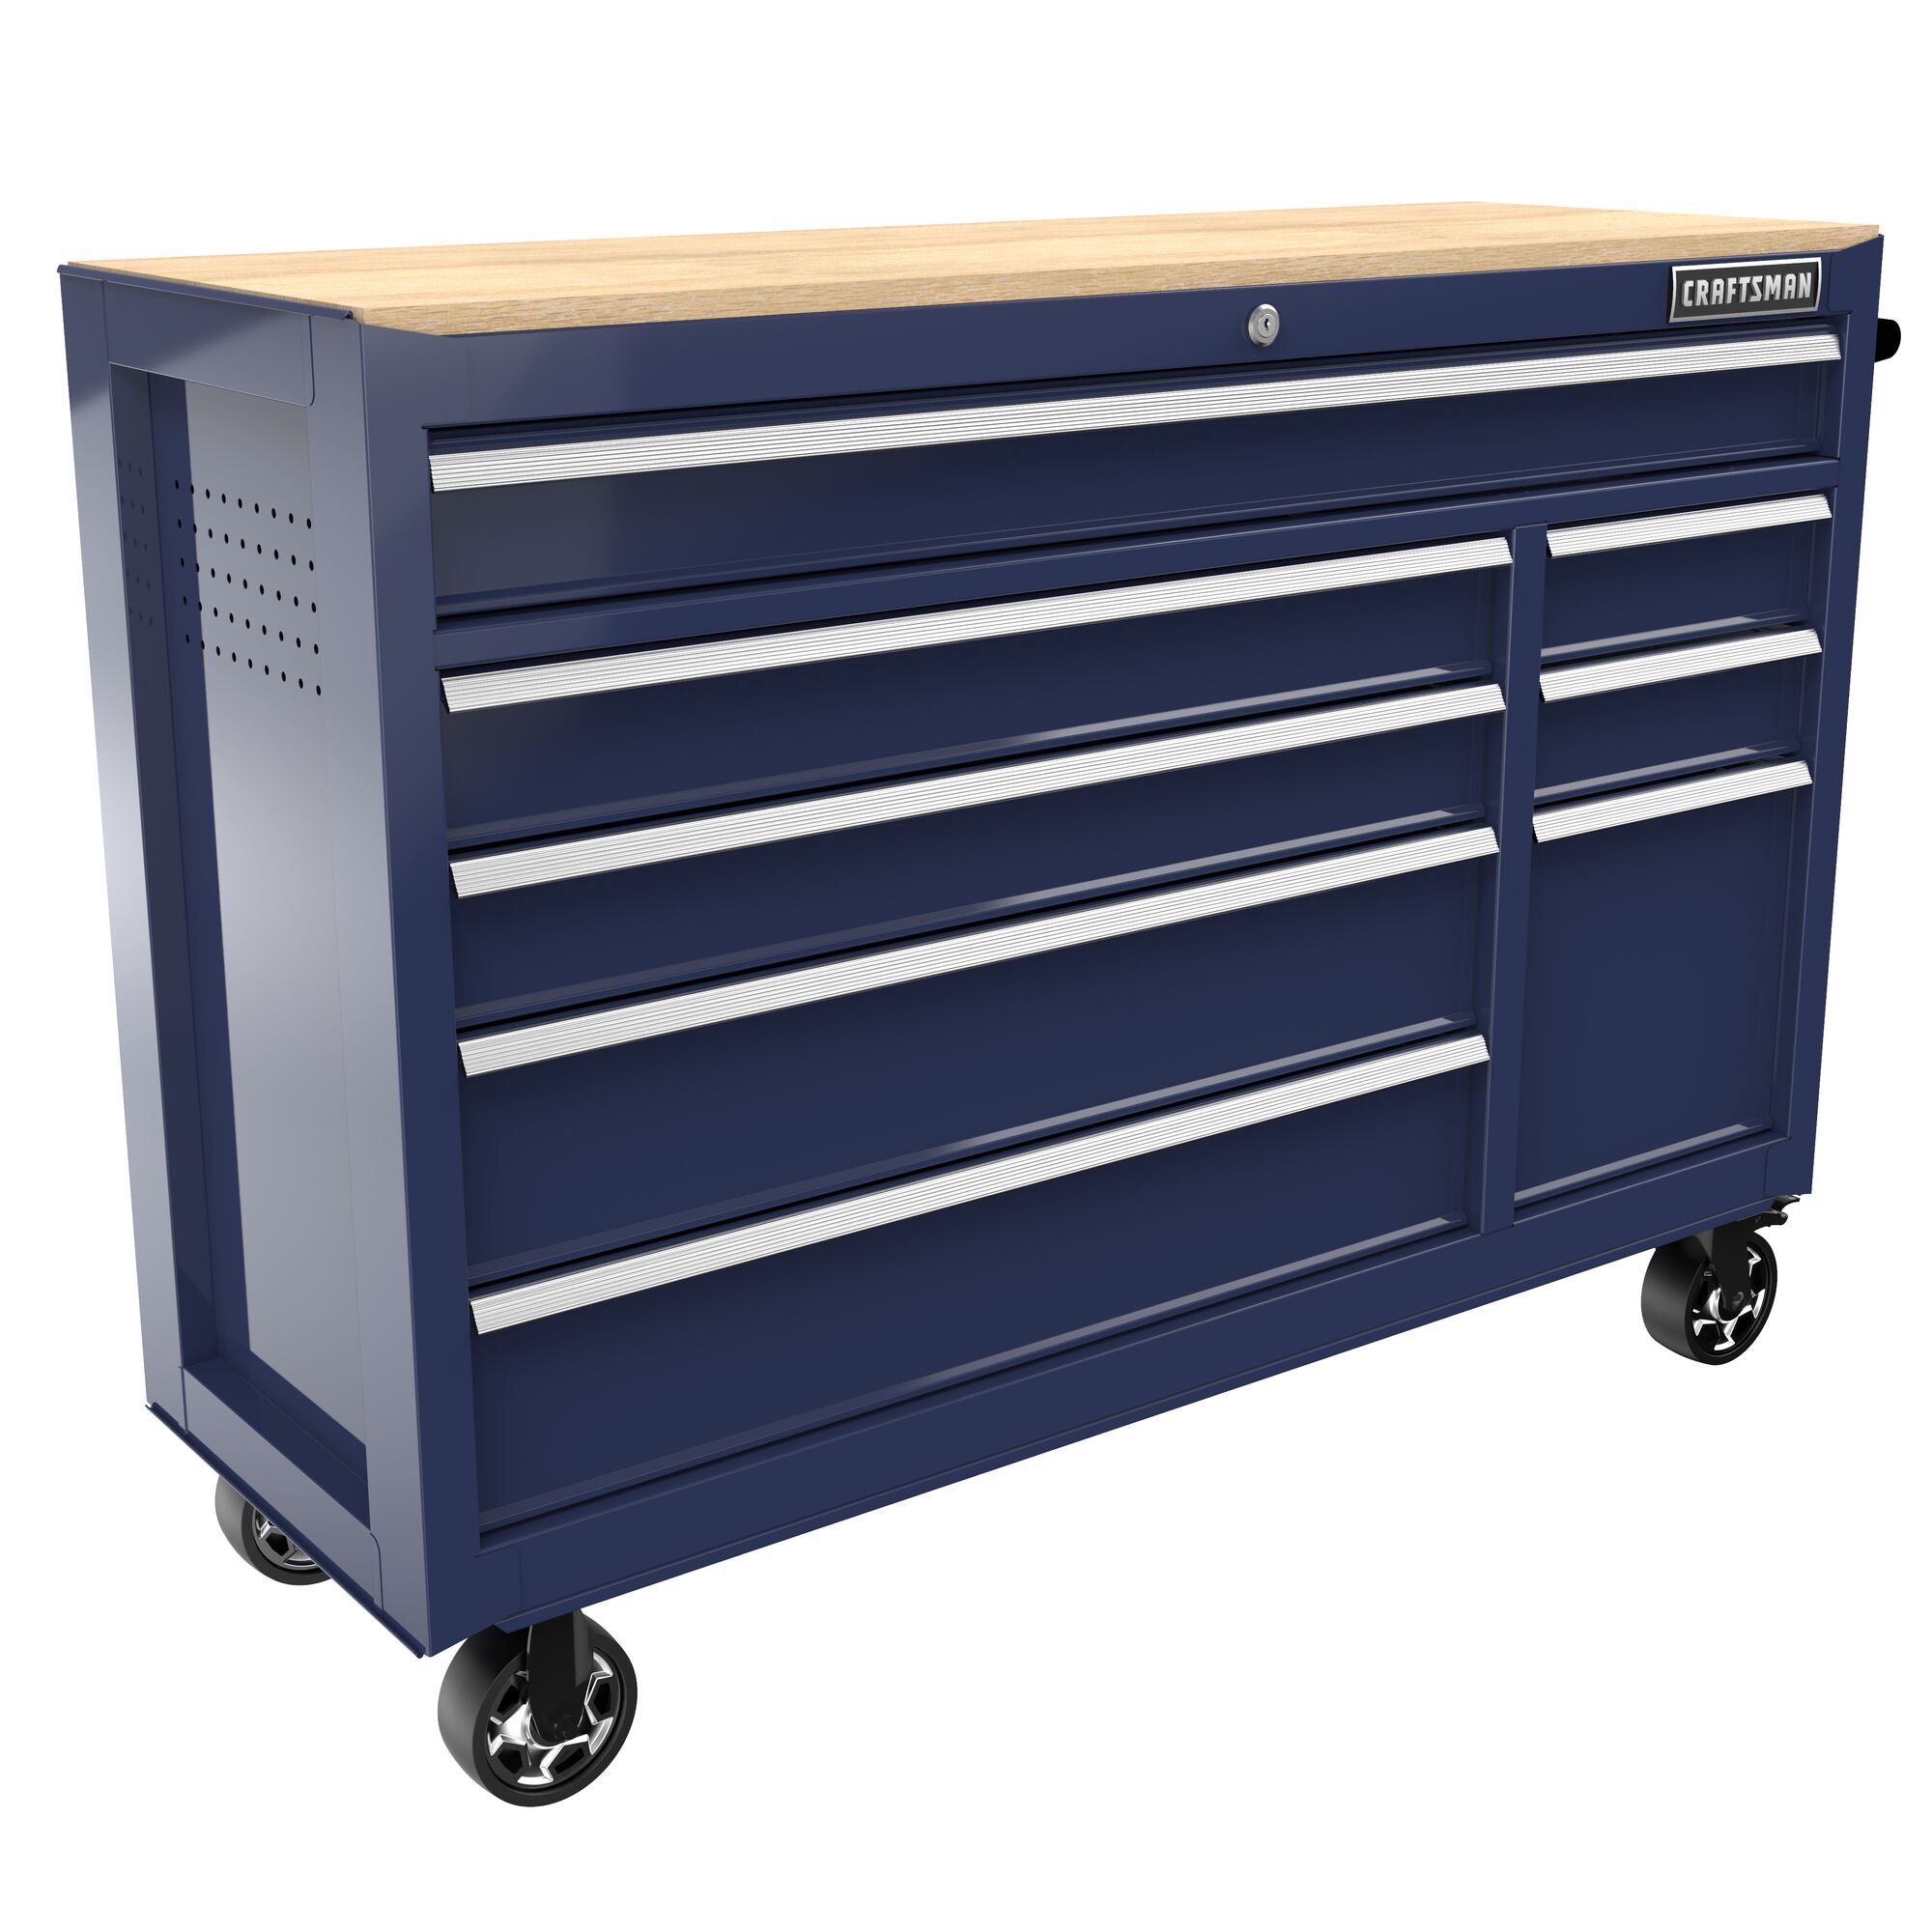 CRAFTSMAN S2000 Workstation in Midnight Blue with Wood Worktop angled view 